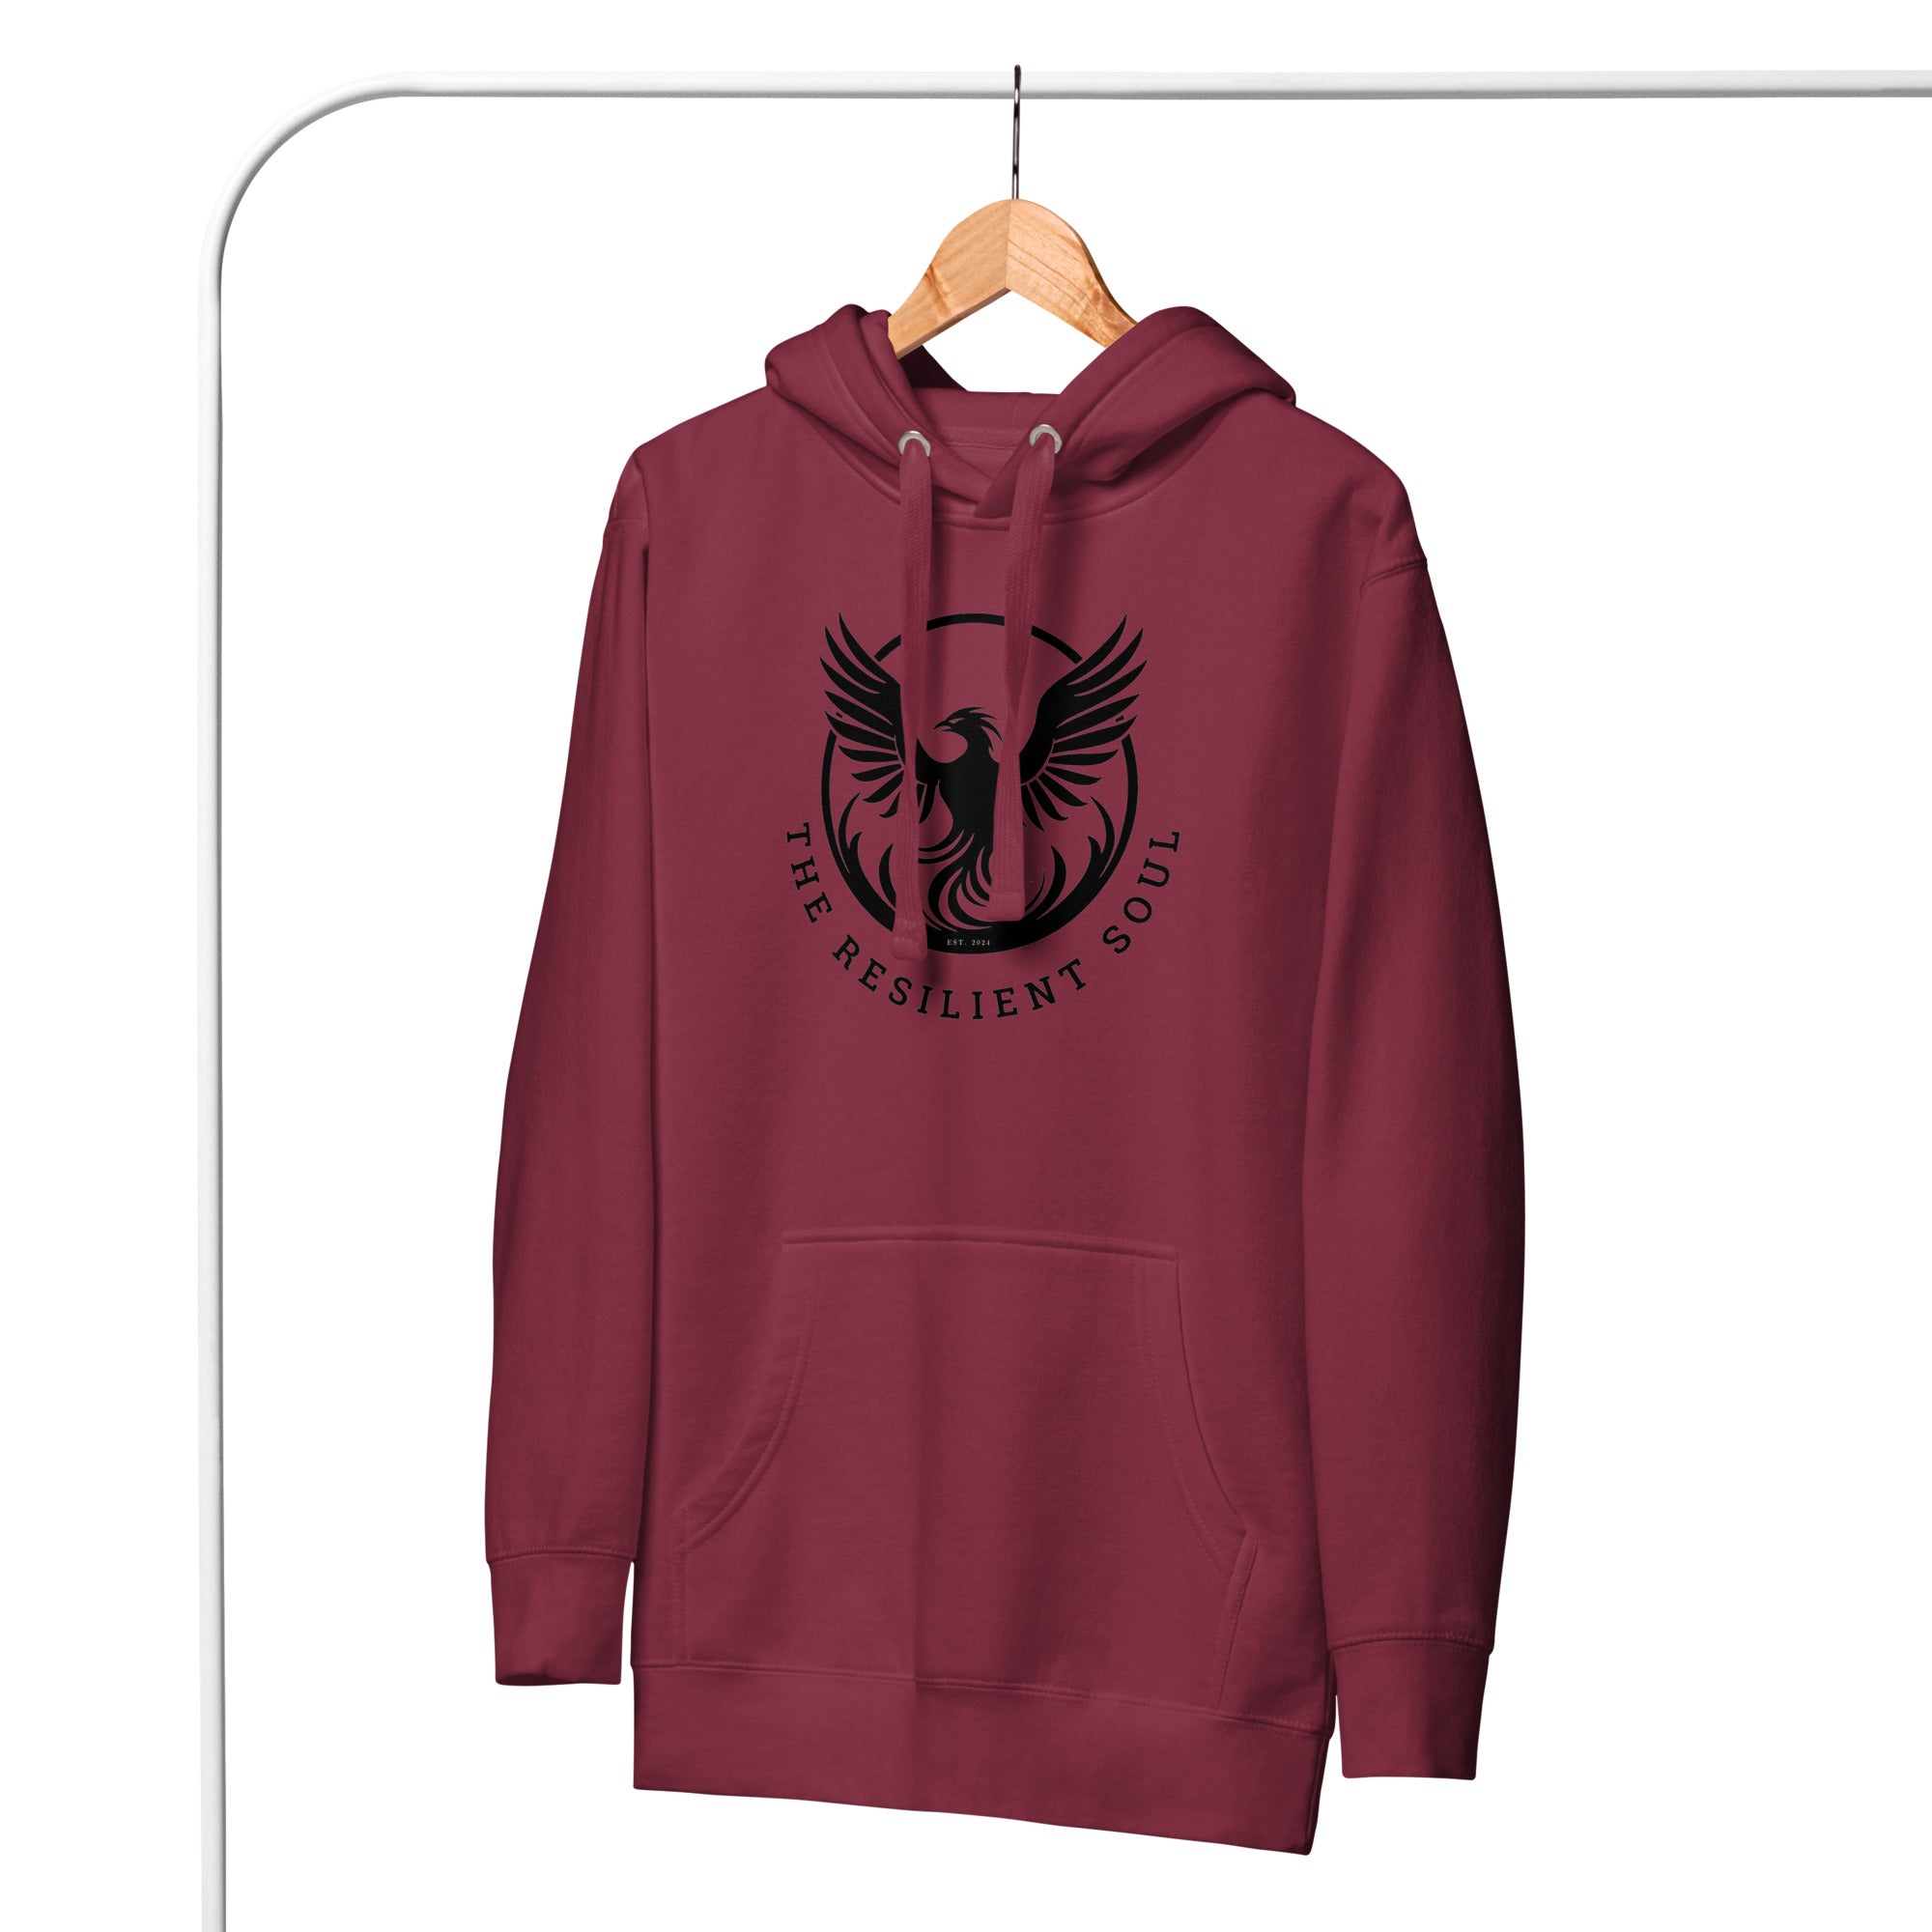 The Resilient Soul Unisex Hoodie - My Store